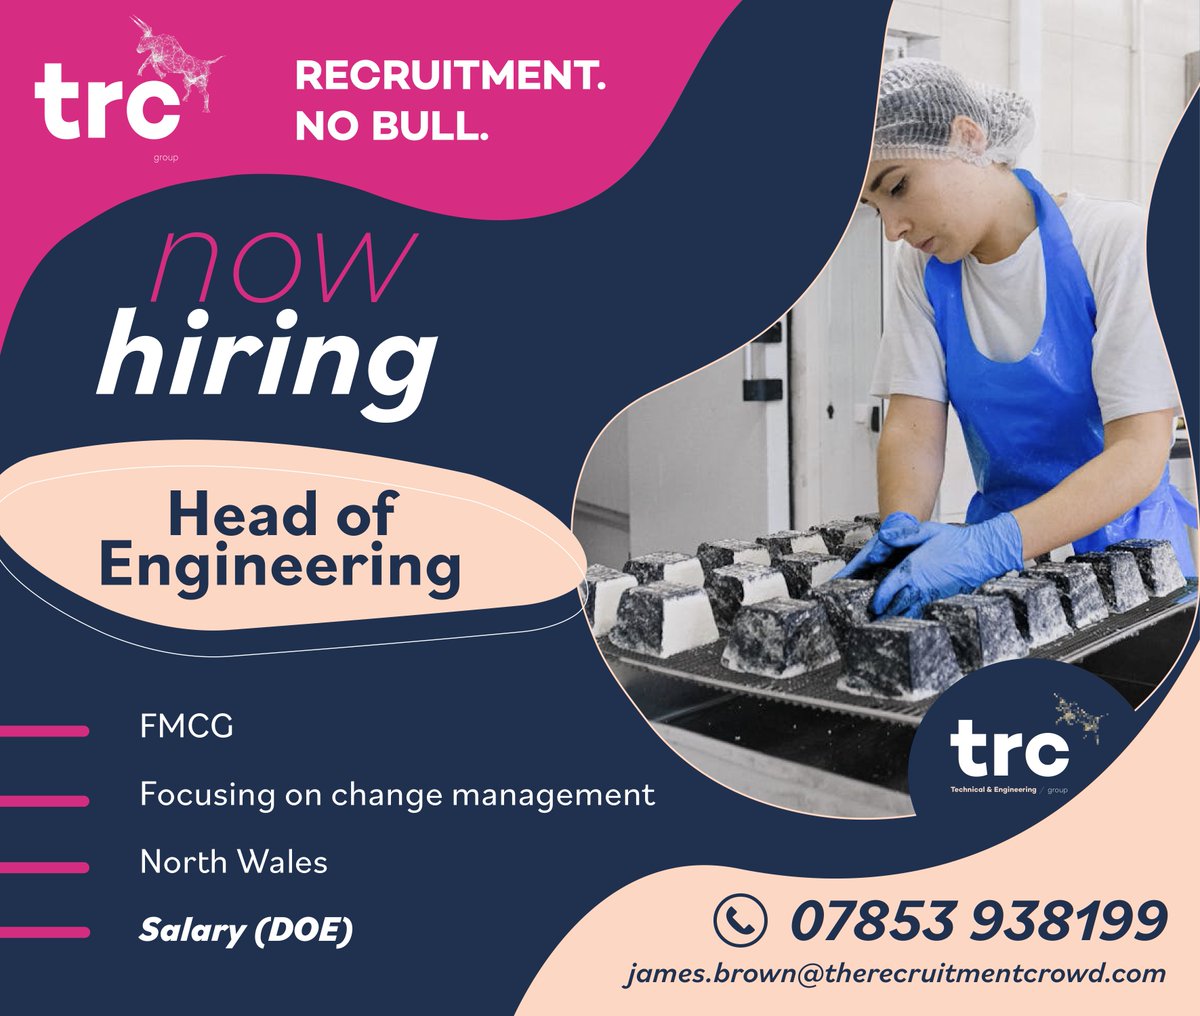 Our client is looking to recruit a Head of Engineering in North Wales. Interested? Get in touch with James Brown or see our other vacancies via our website 👉 therecruitmentcrowd.com/job-search/ #northwales #engineering #therecruitmentcrowd #nobull